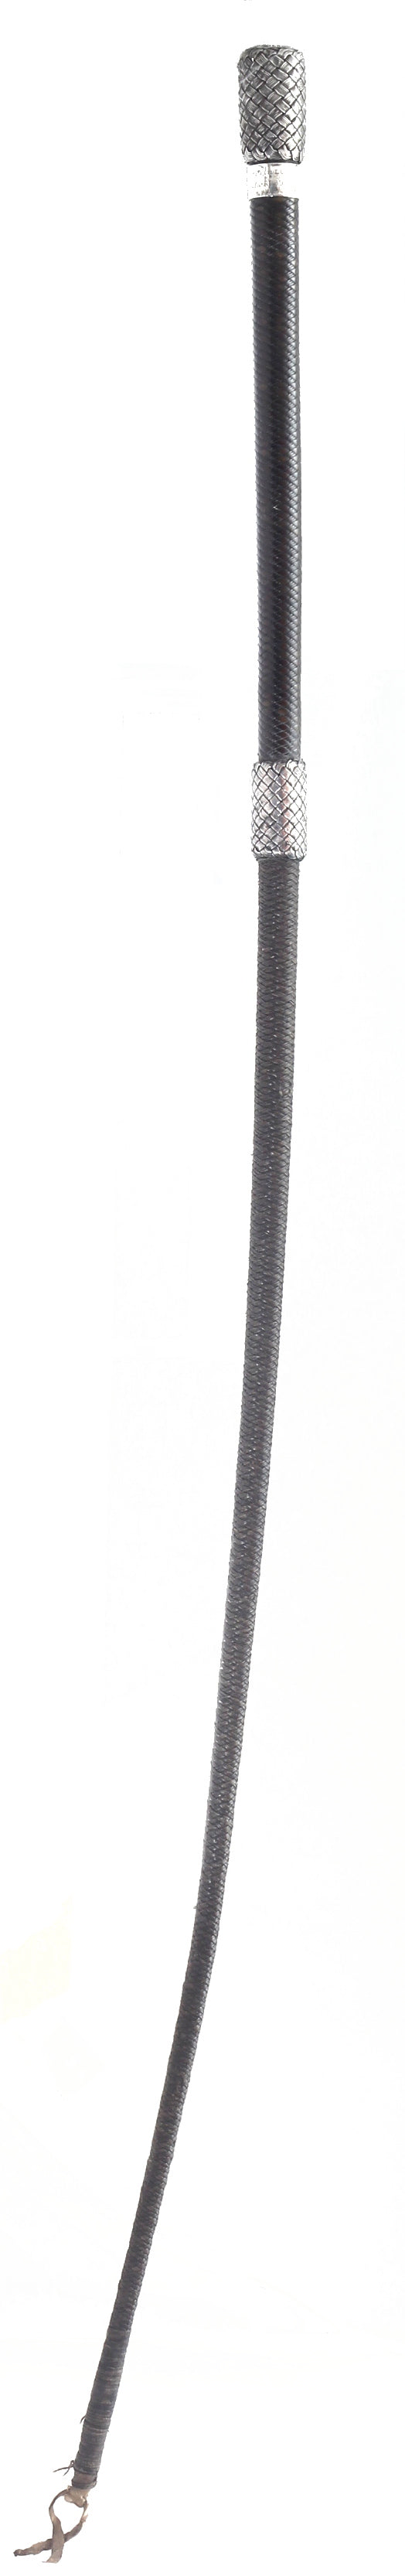 c.1840 Gents Whip by Griffiths with Braided Silver Mounts